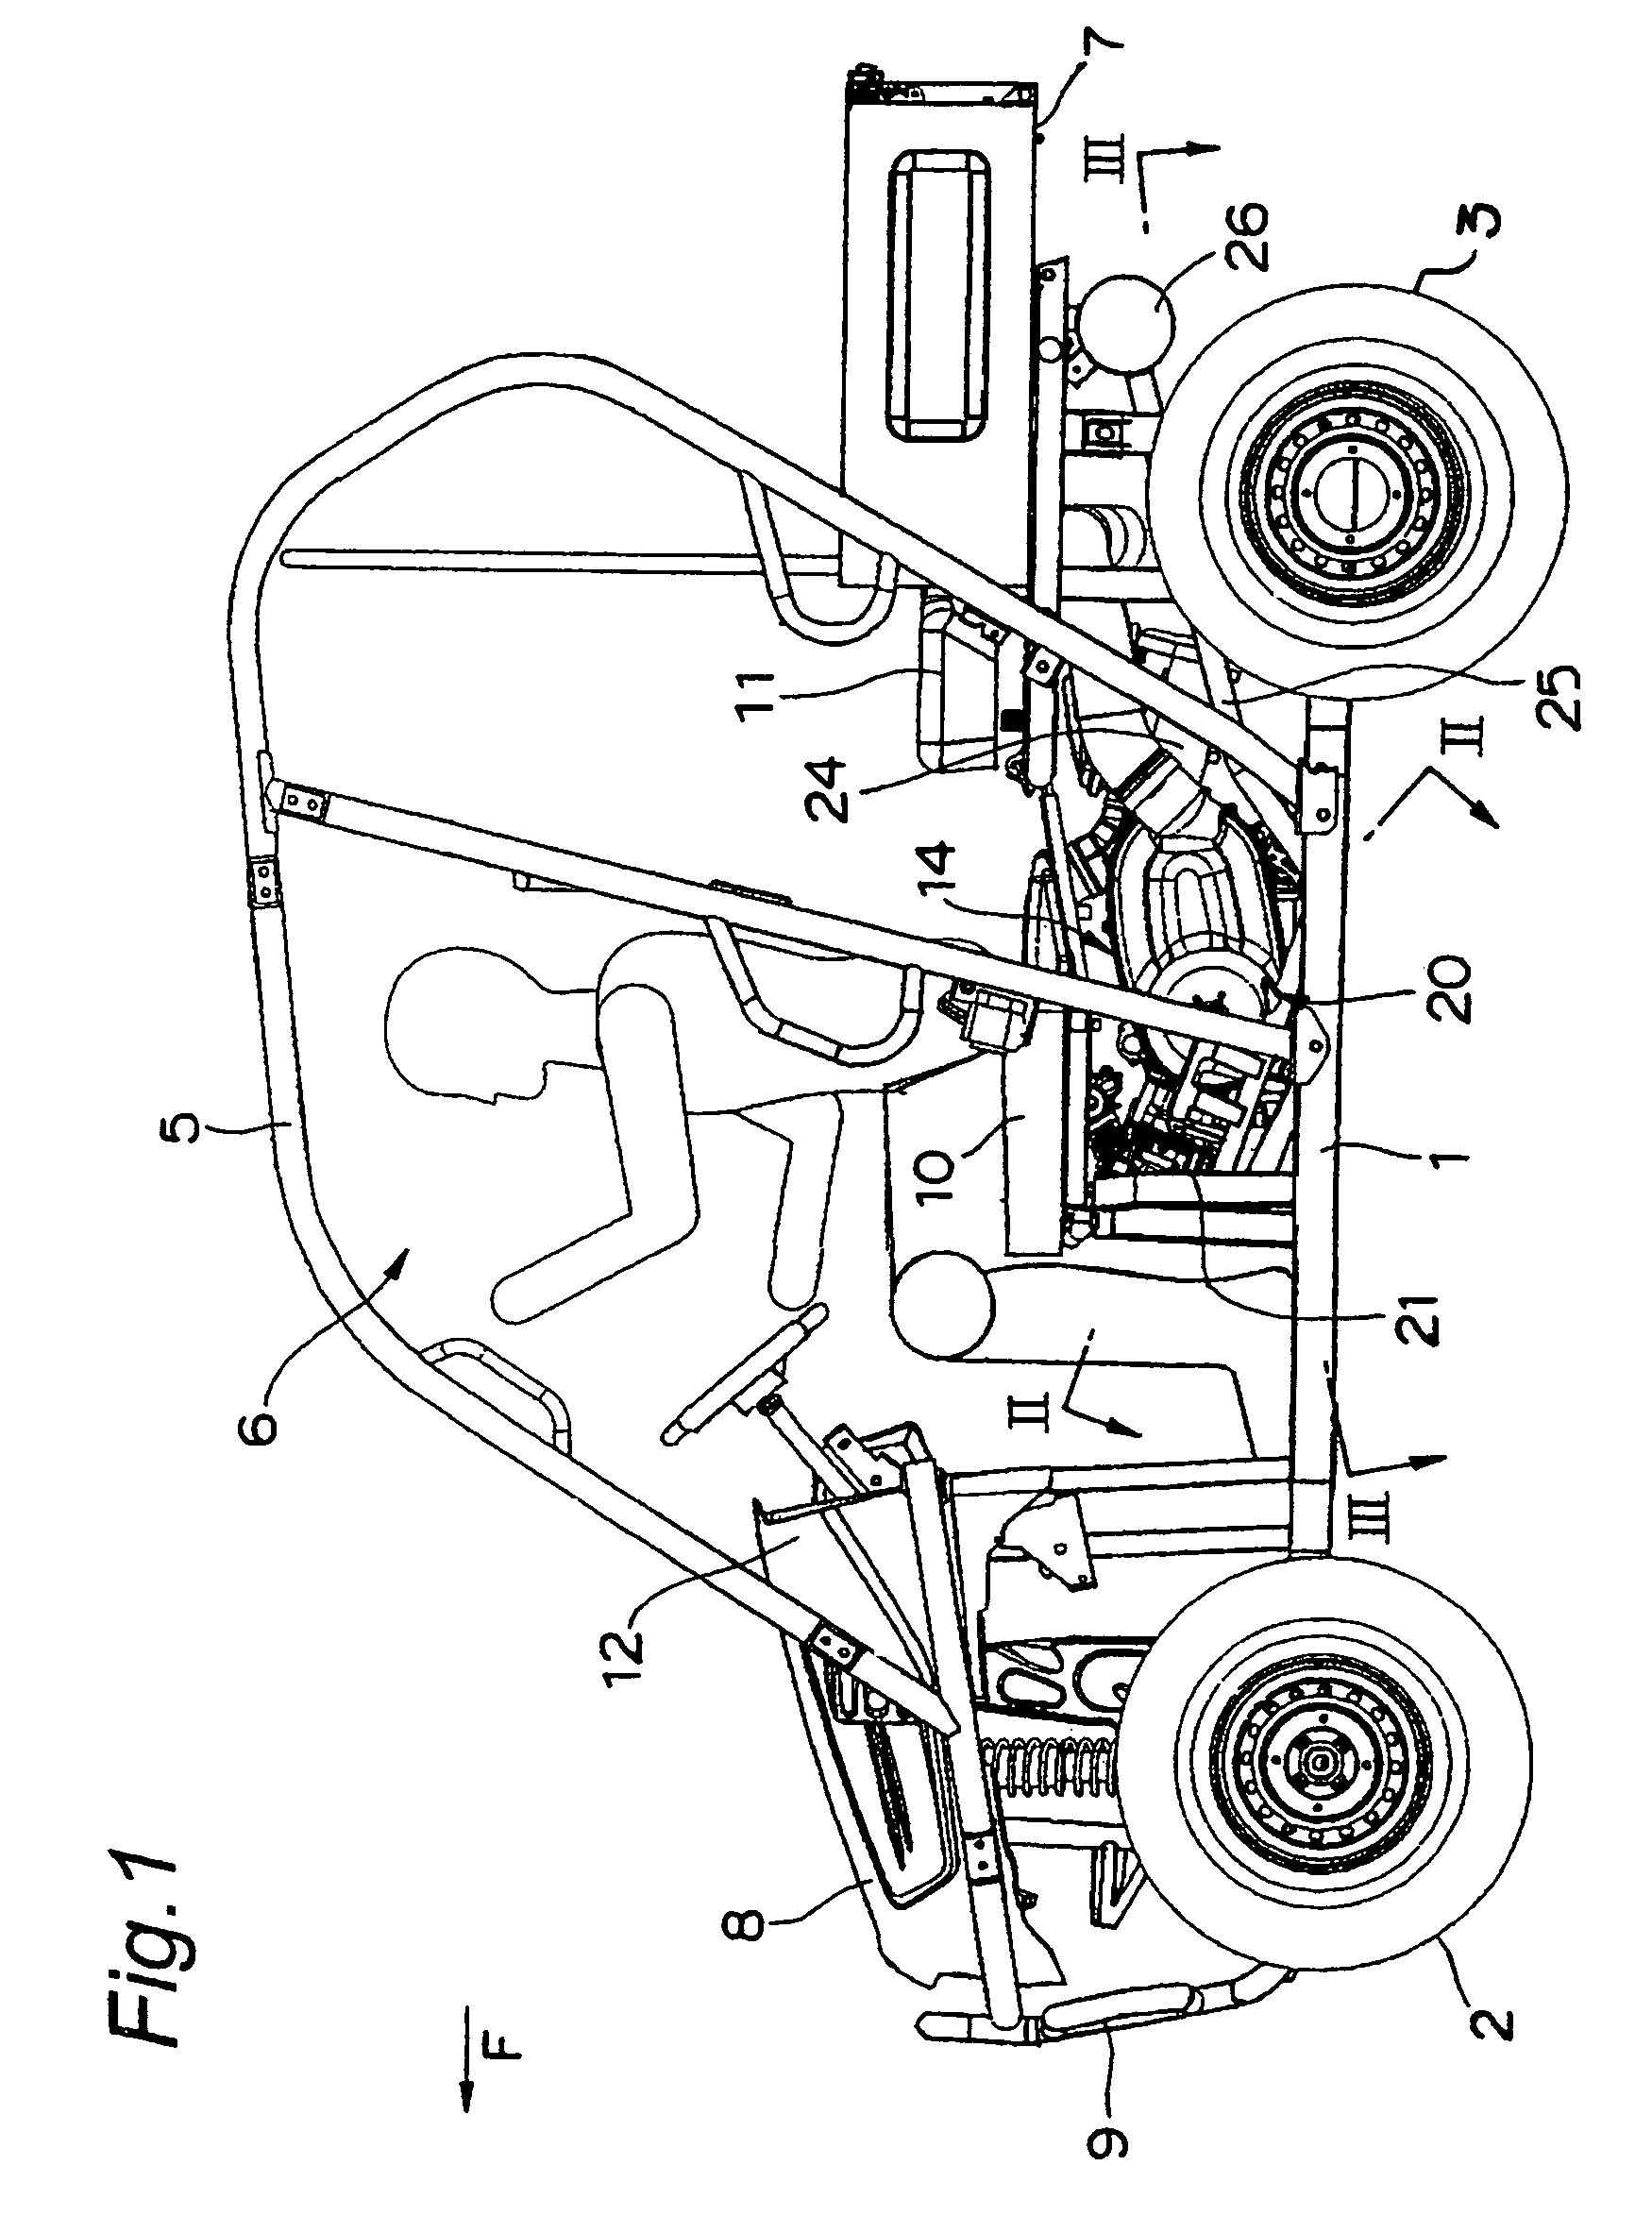 Engine with centrifugal clutch